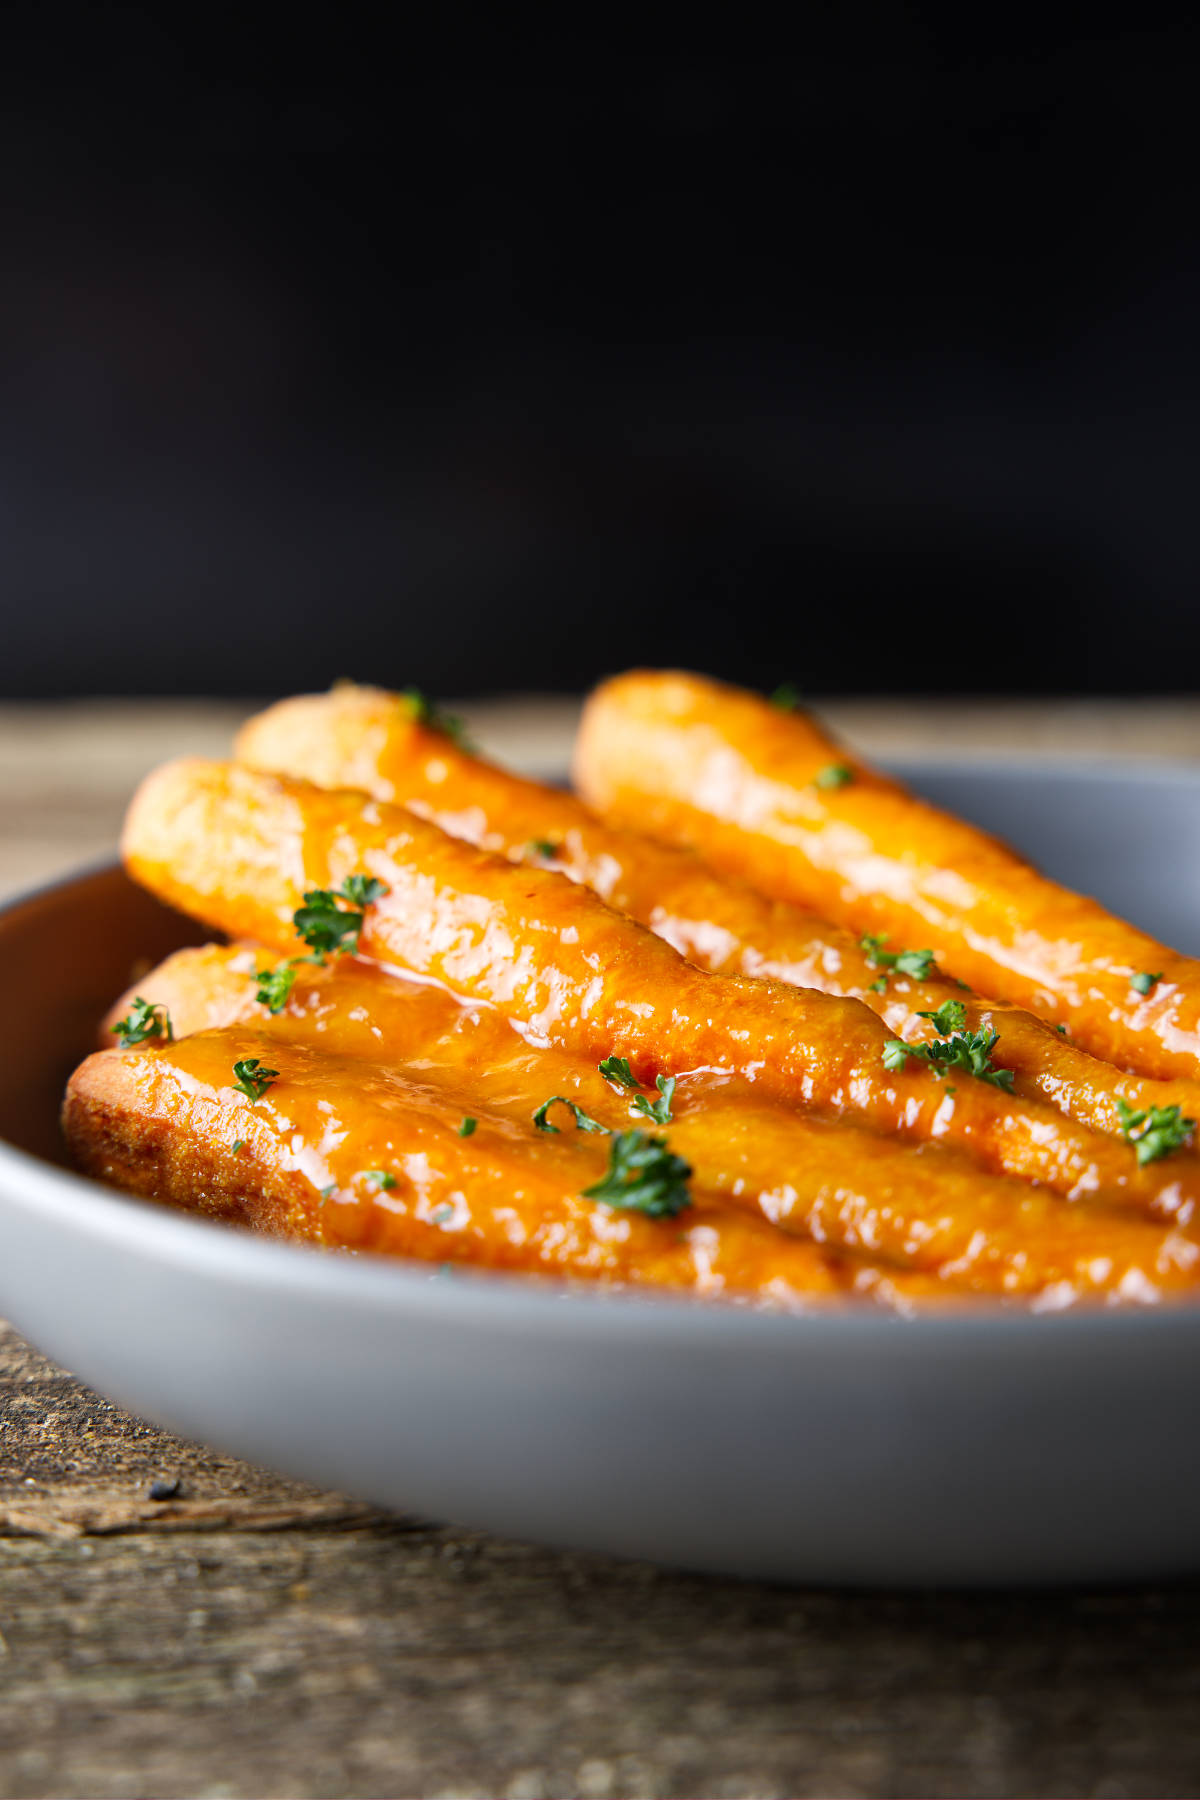 Glazed smoked carrots in a bowl.